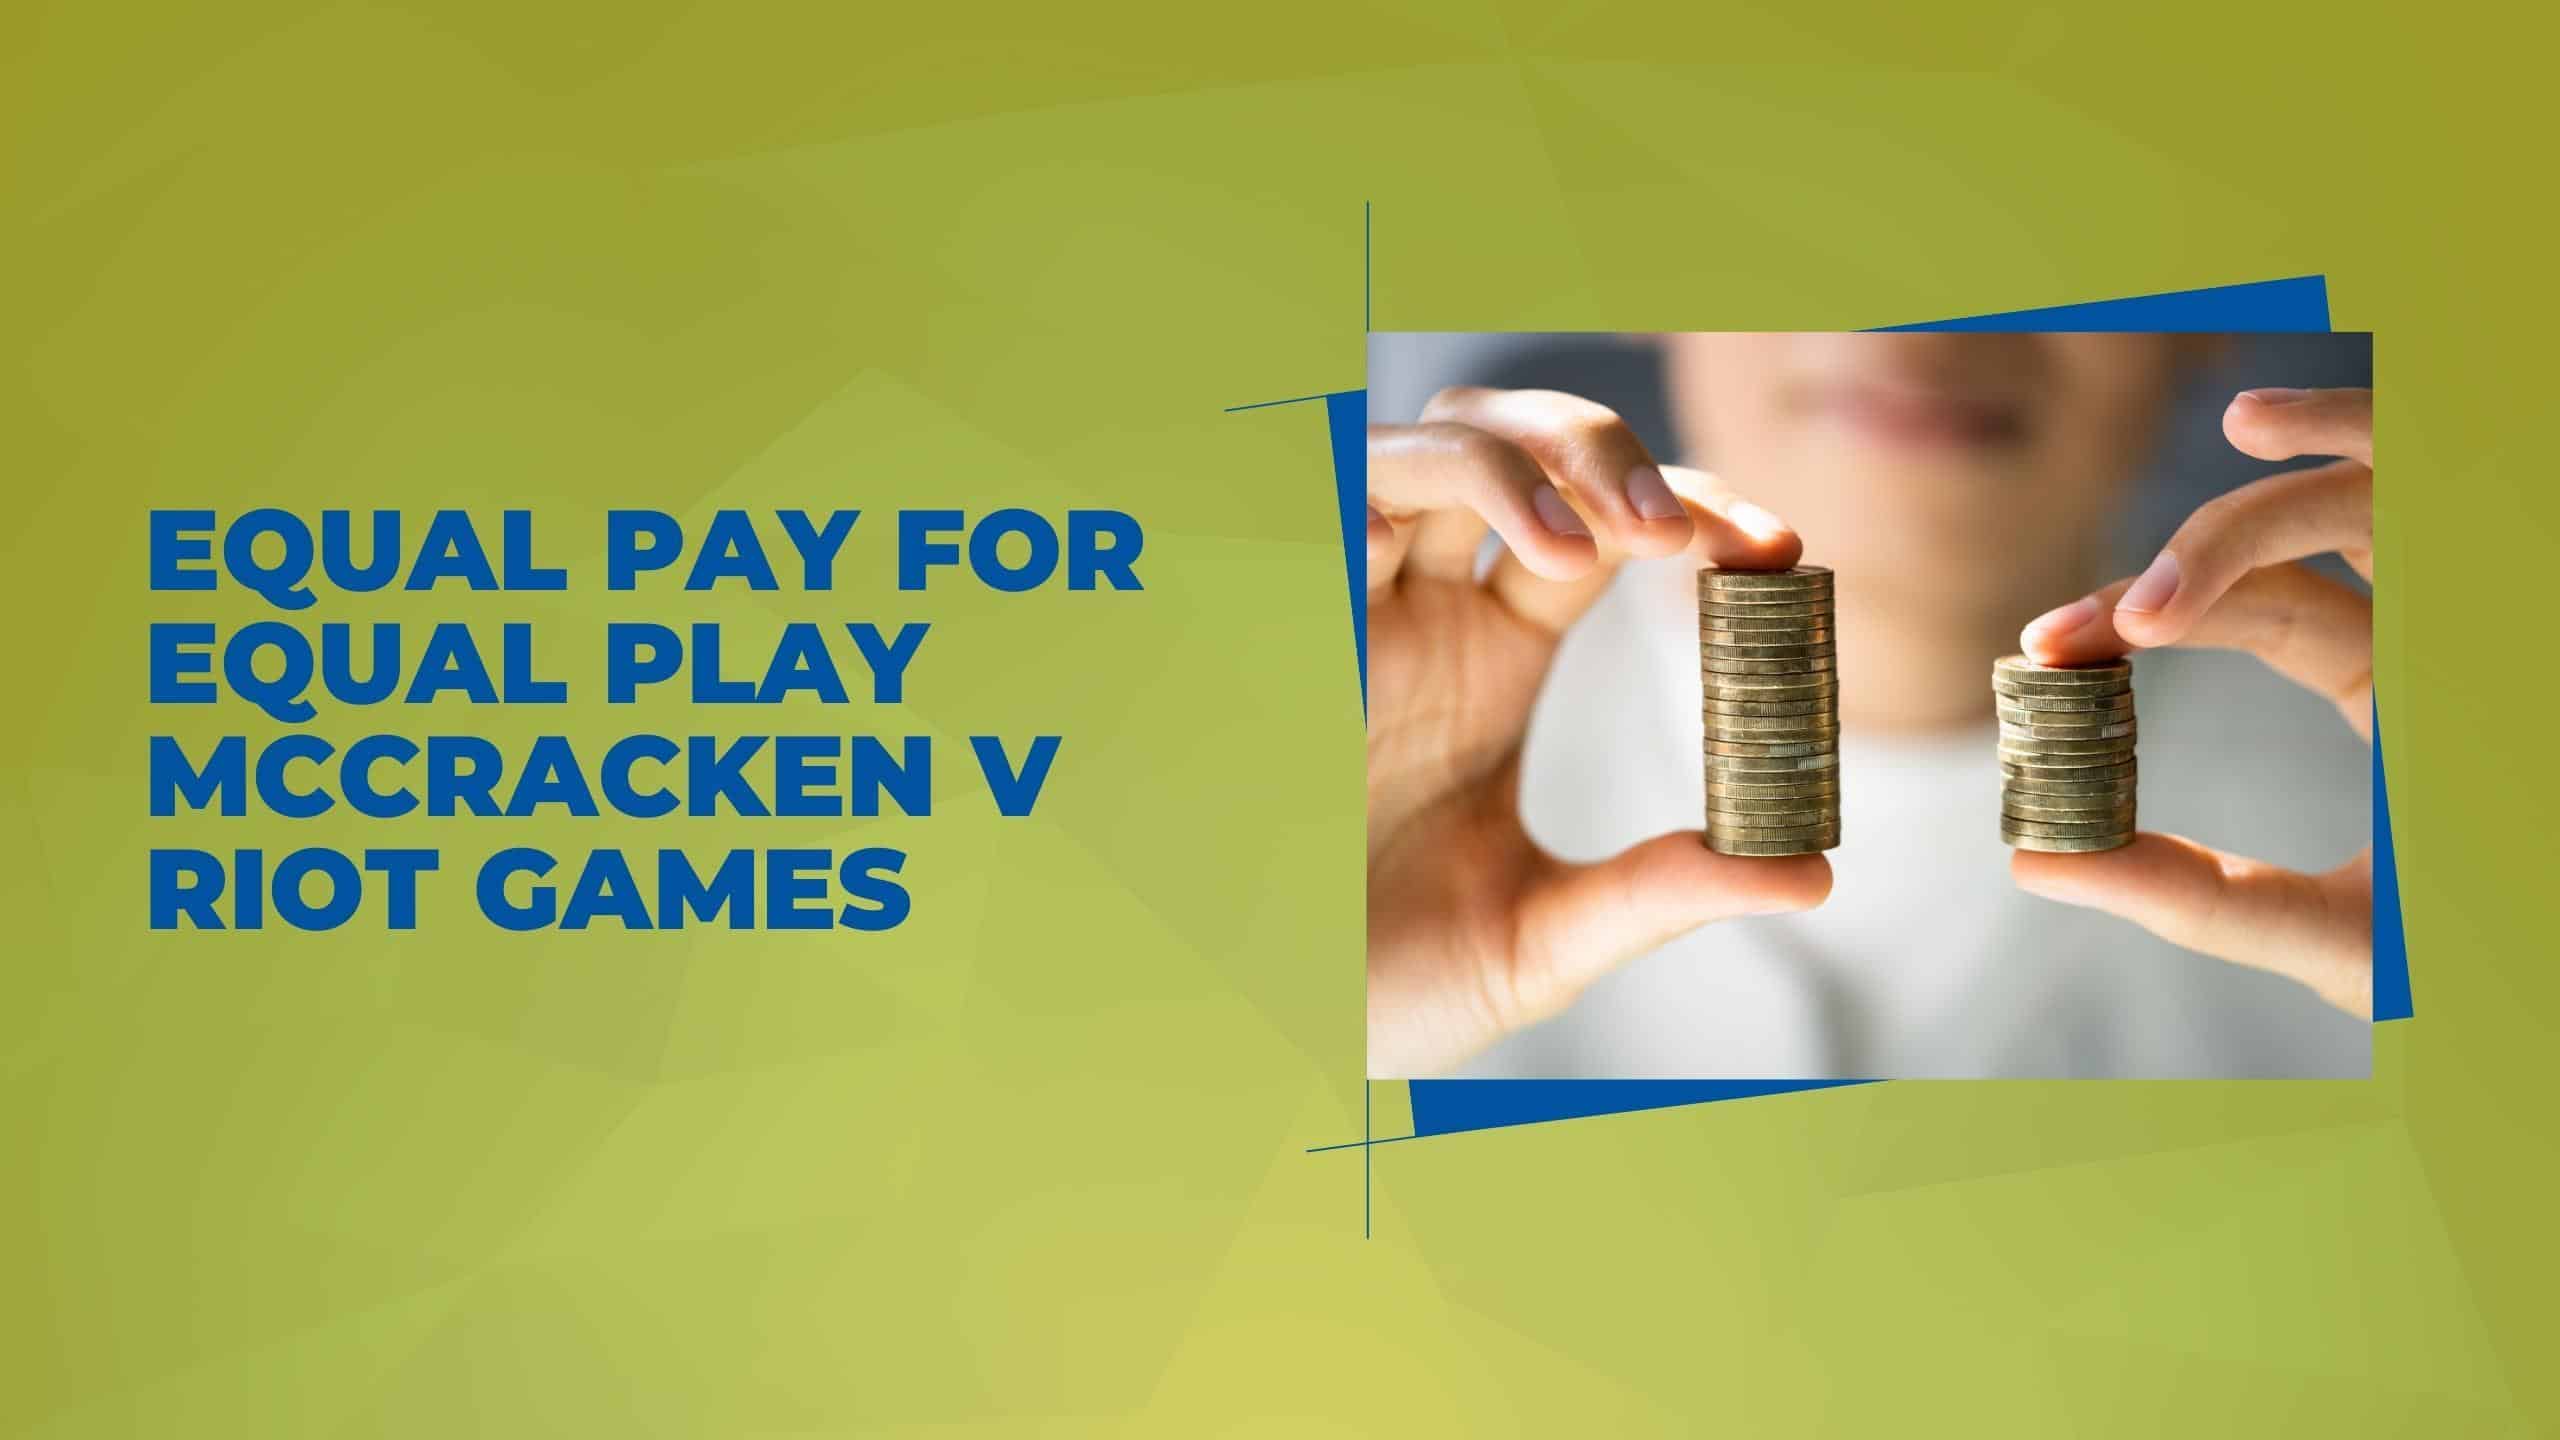 Equal Pay for Equal Play: McCracken v. Riot Games